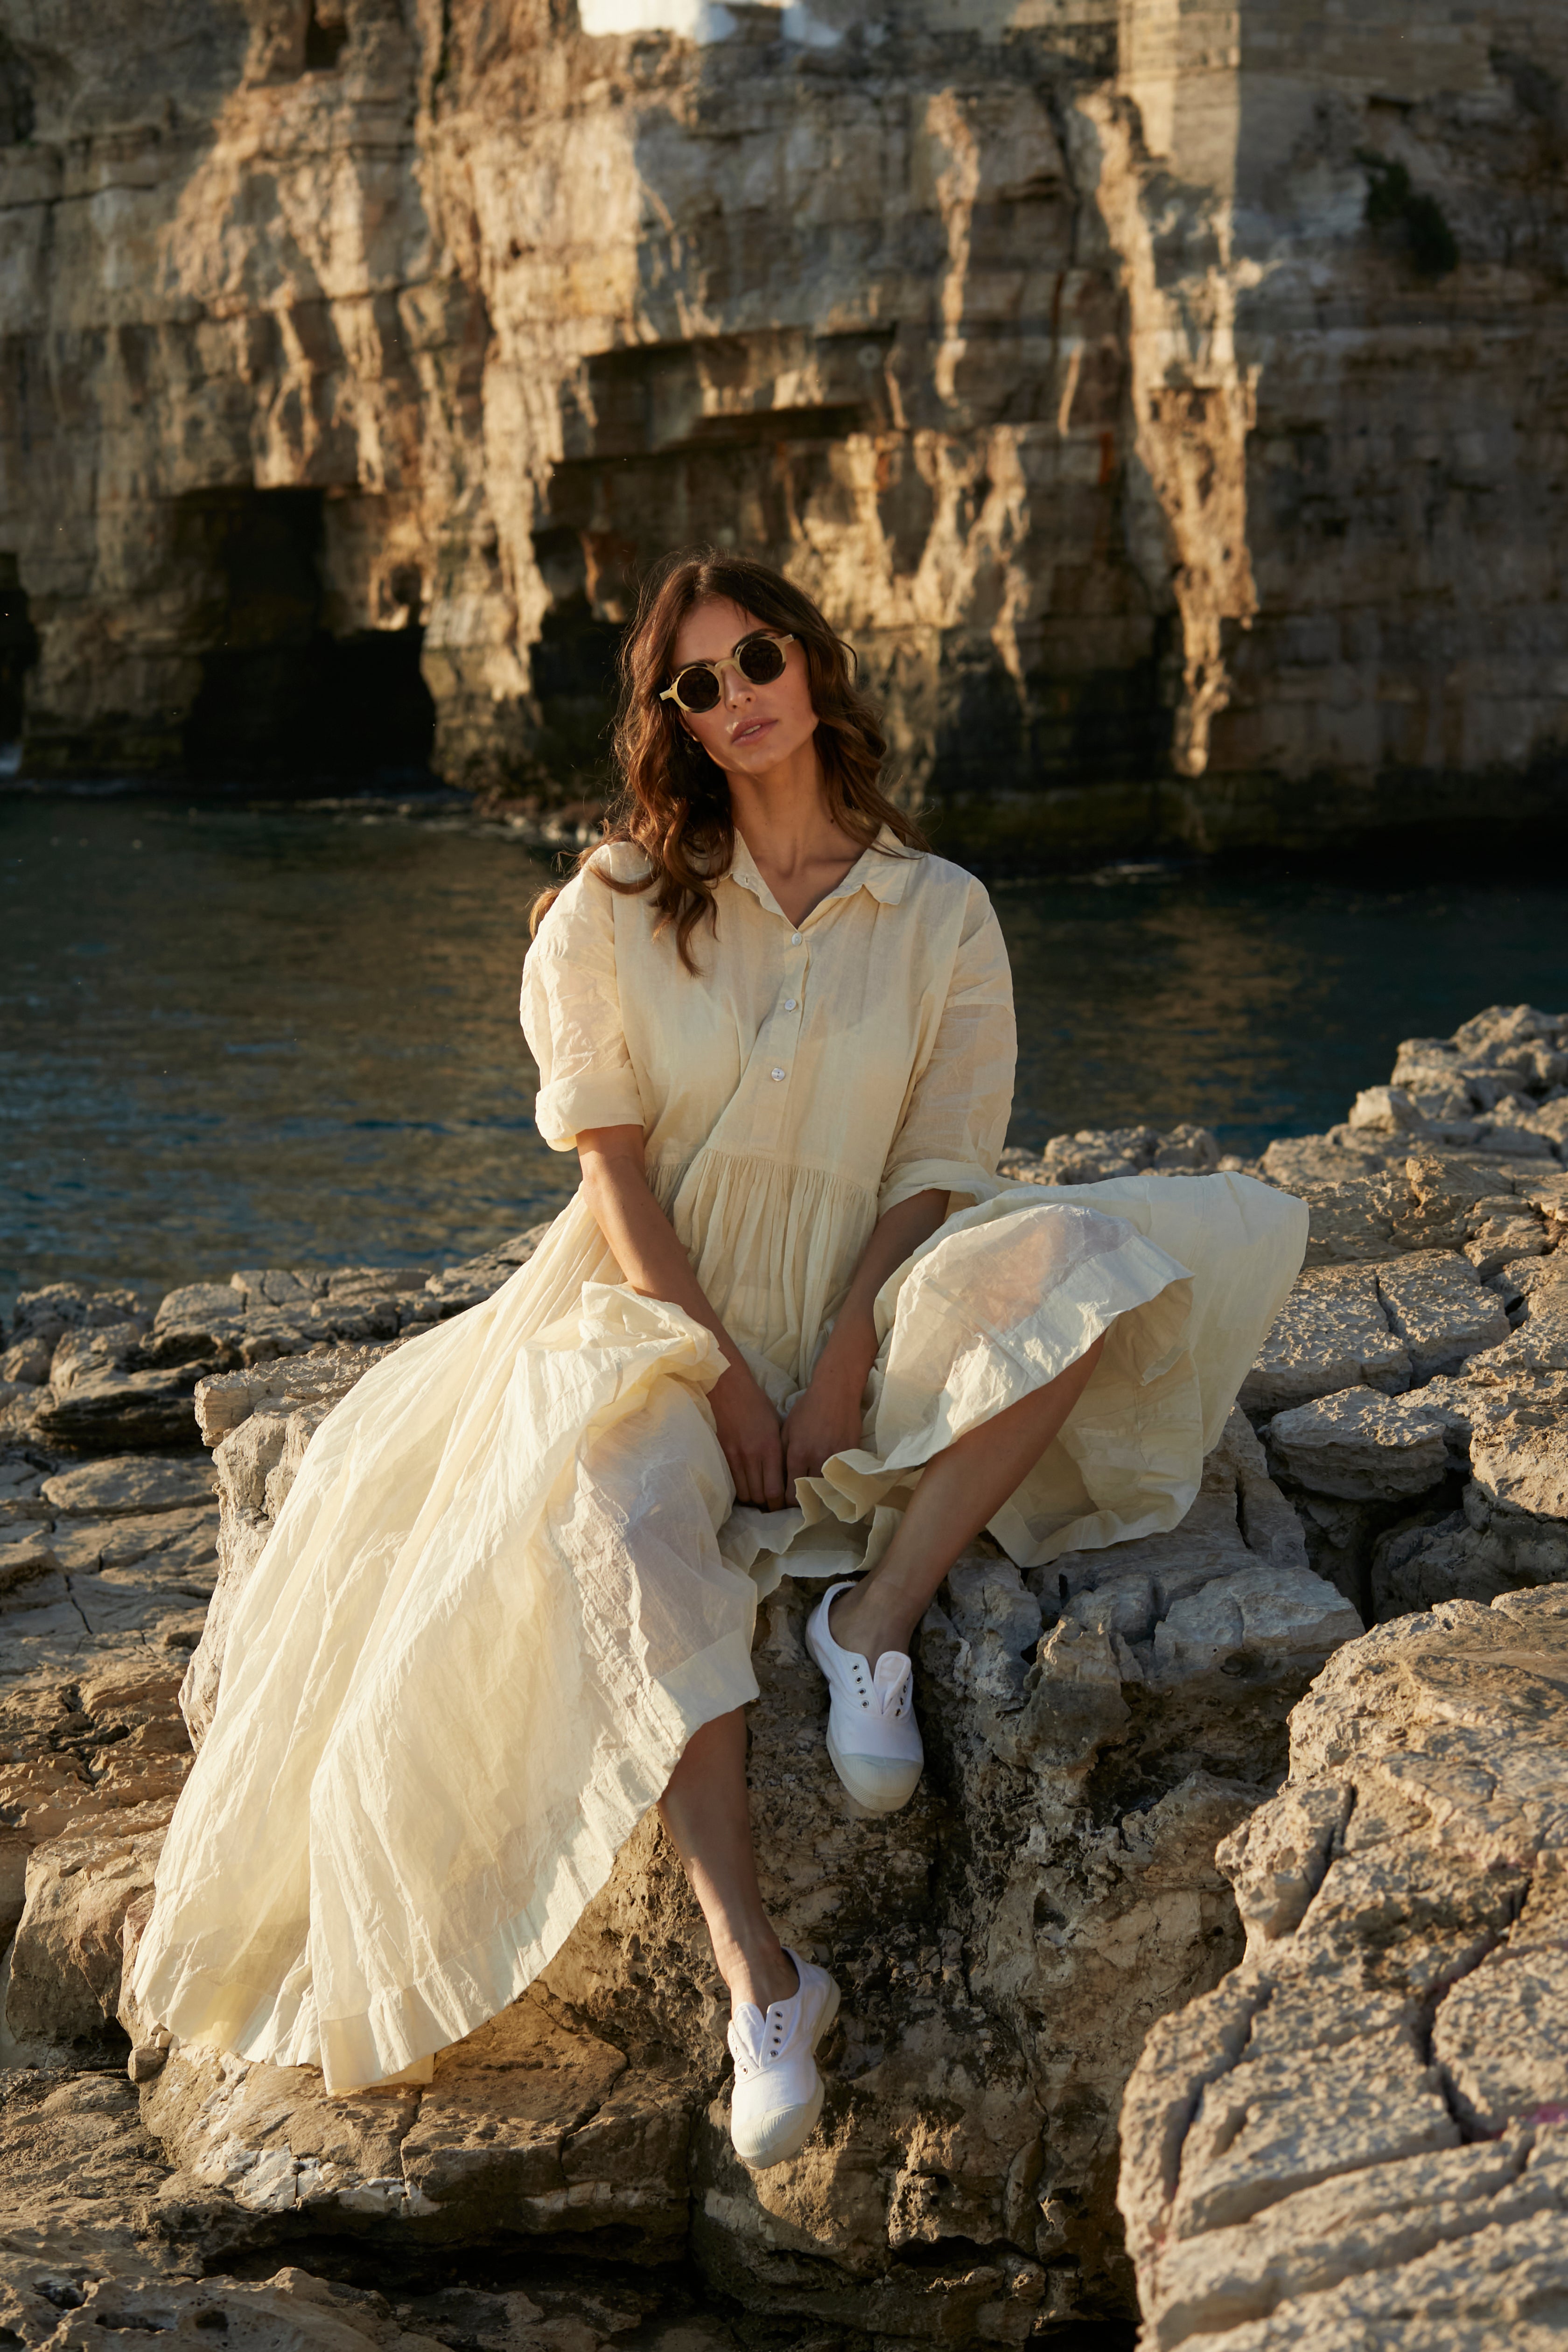 A MegbyDesign model is wearing an ecru edith dress made from a gorgeous organdy material. The model is sitting on a rock by the sea.